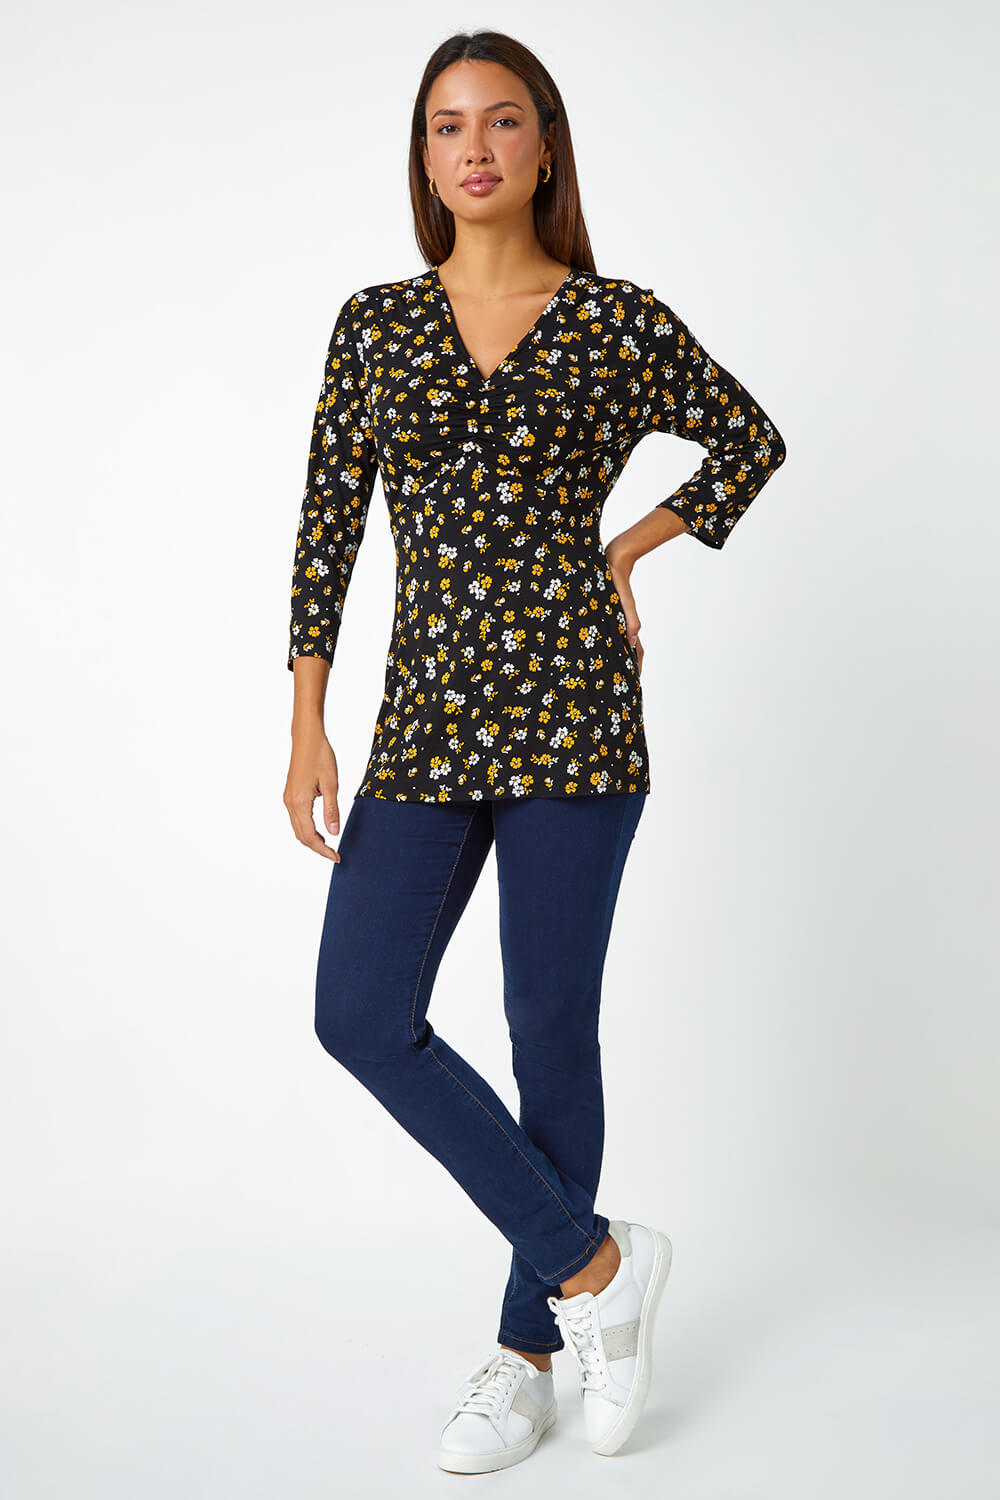 Ochre Floral Print Ruched Stretch Top , Image 2 of 5